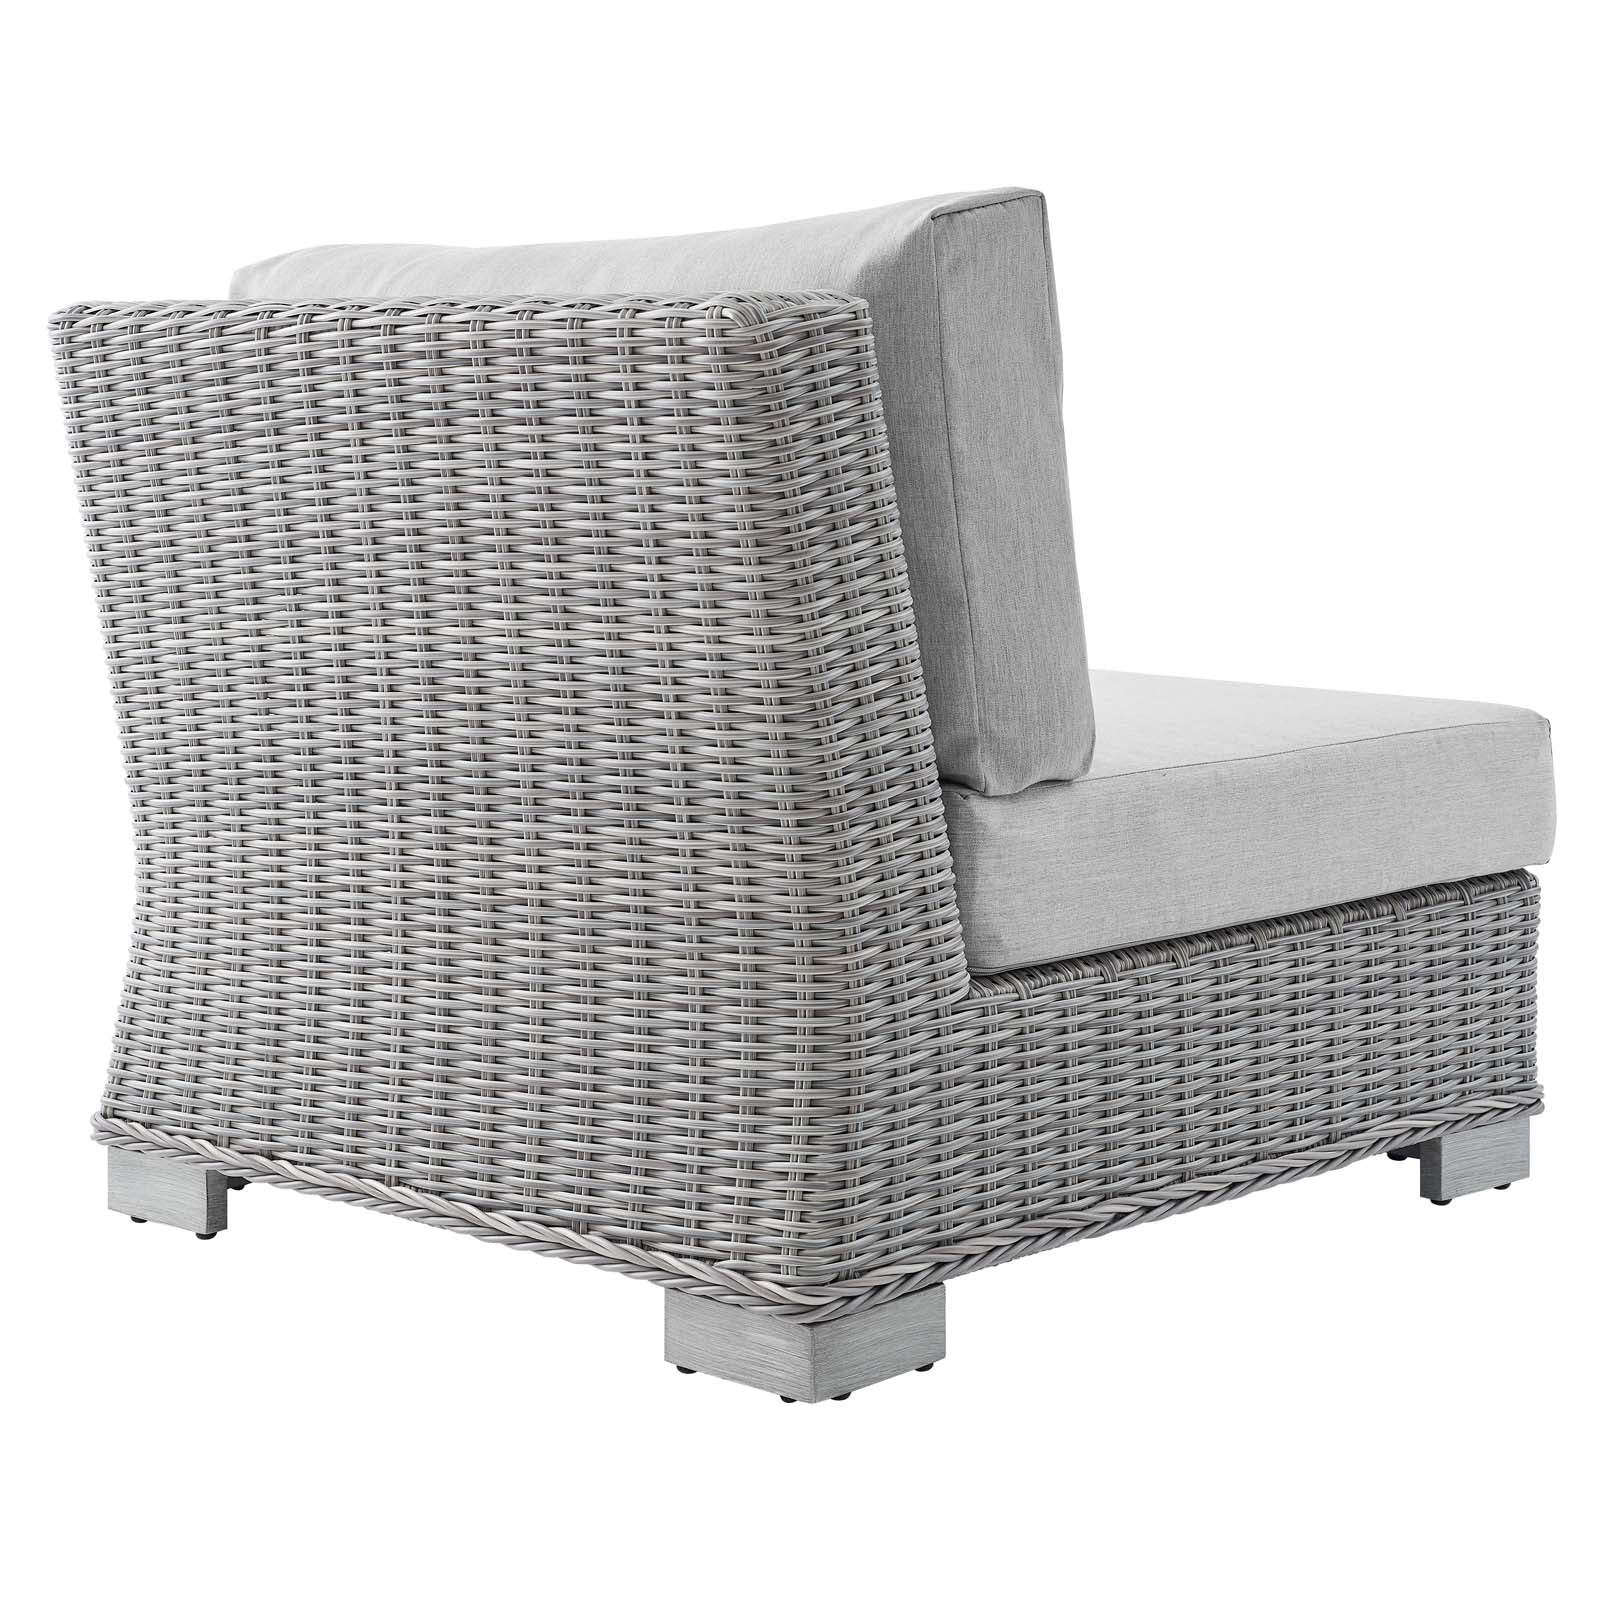 Modway Outdoor Chairs - Conway Sunbrella Outdoor Patio Wicker Rattan Armless Chair Light Gray